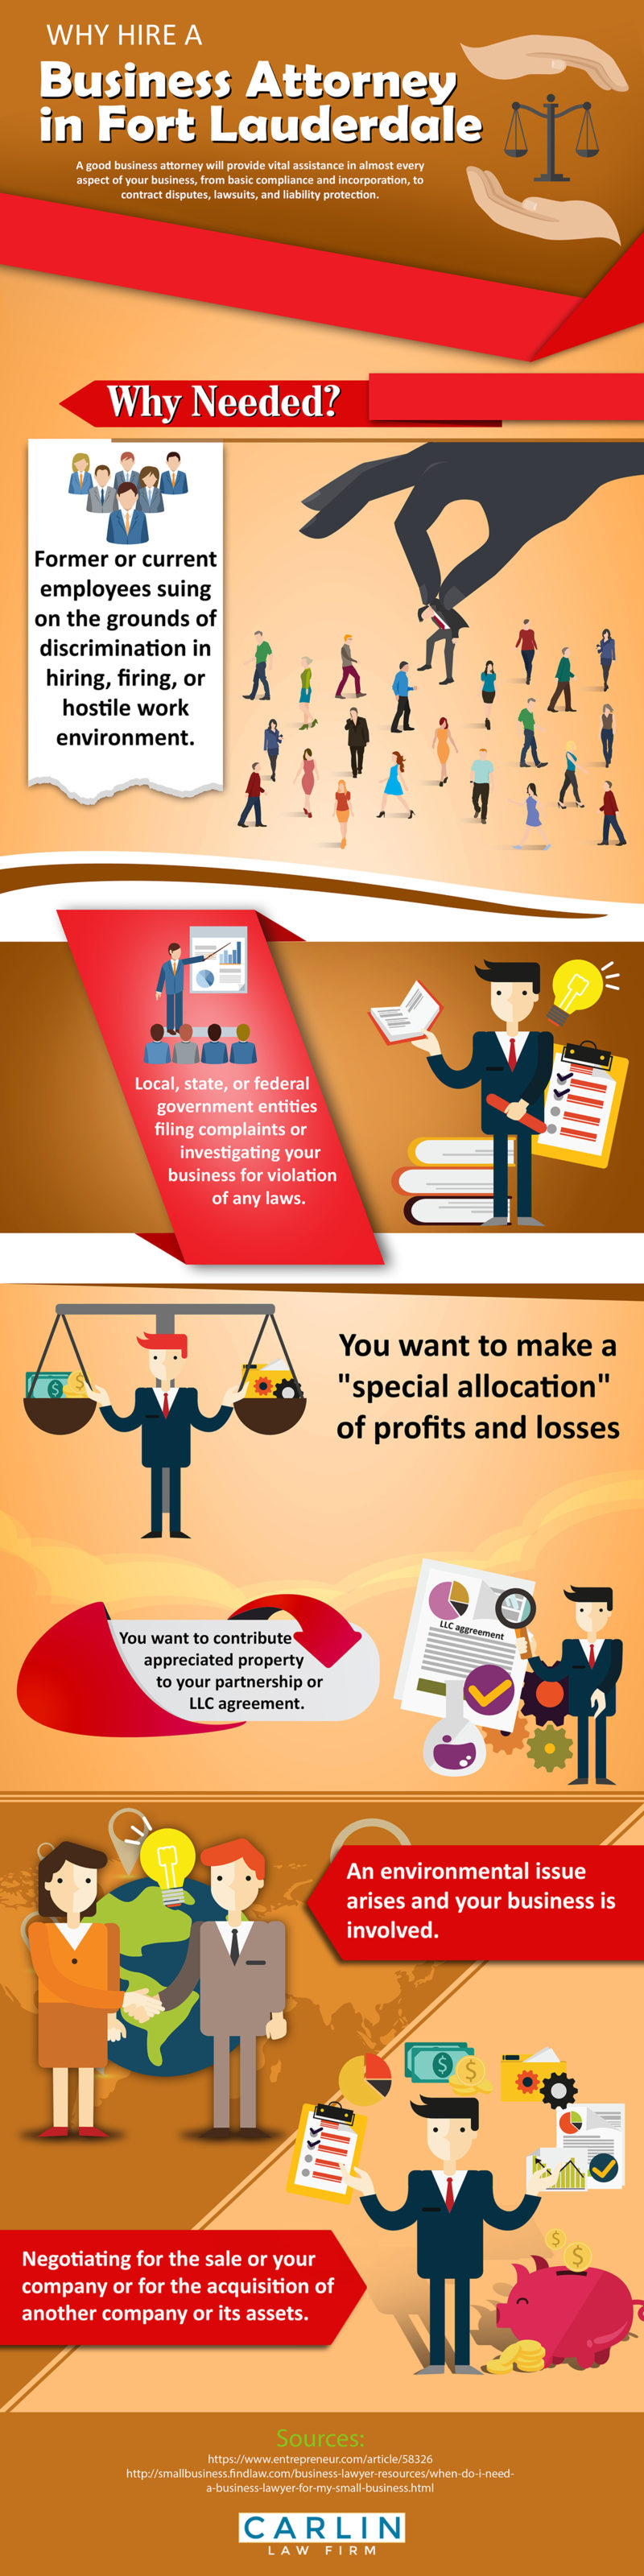 Why You Should Hire a Business Attorney in Fort Lauderdale